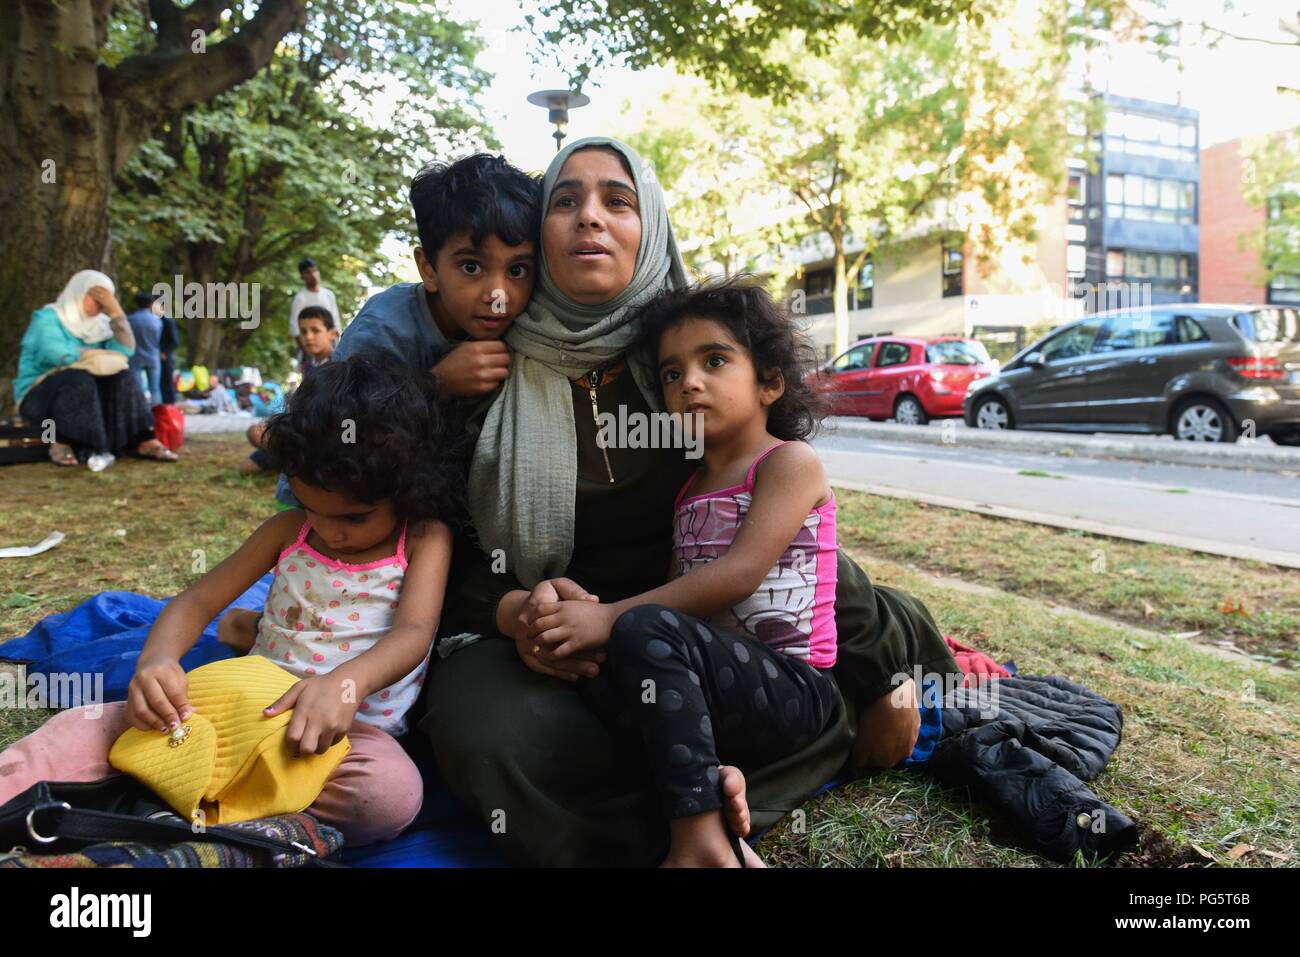 August 14, 2018 - Paris, France: A Syrian family sit in a public park near  porte d'Aubervilliers as they wait for a charity to find them emergency  shelter for the night. The